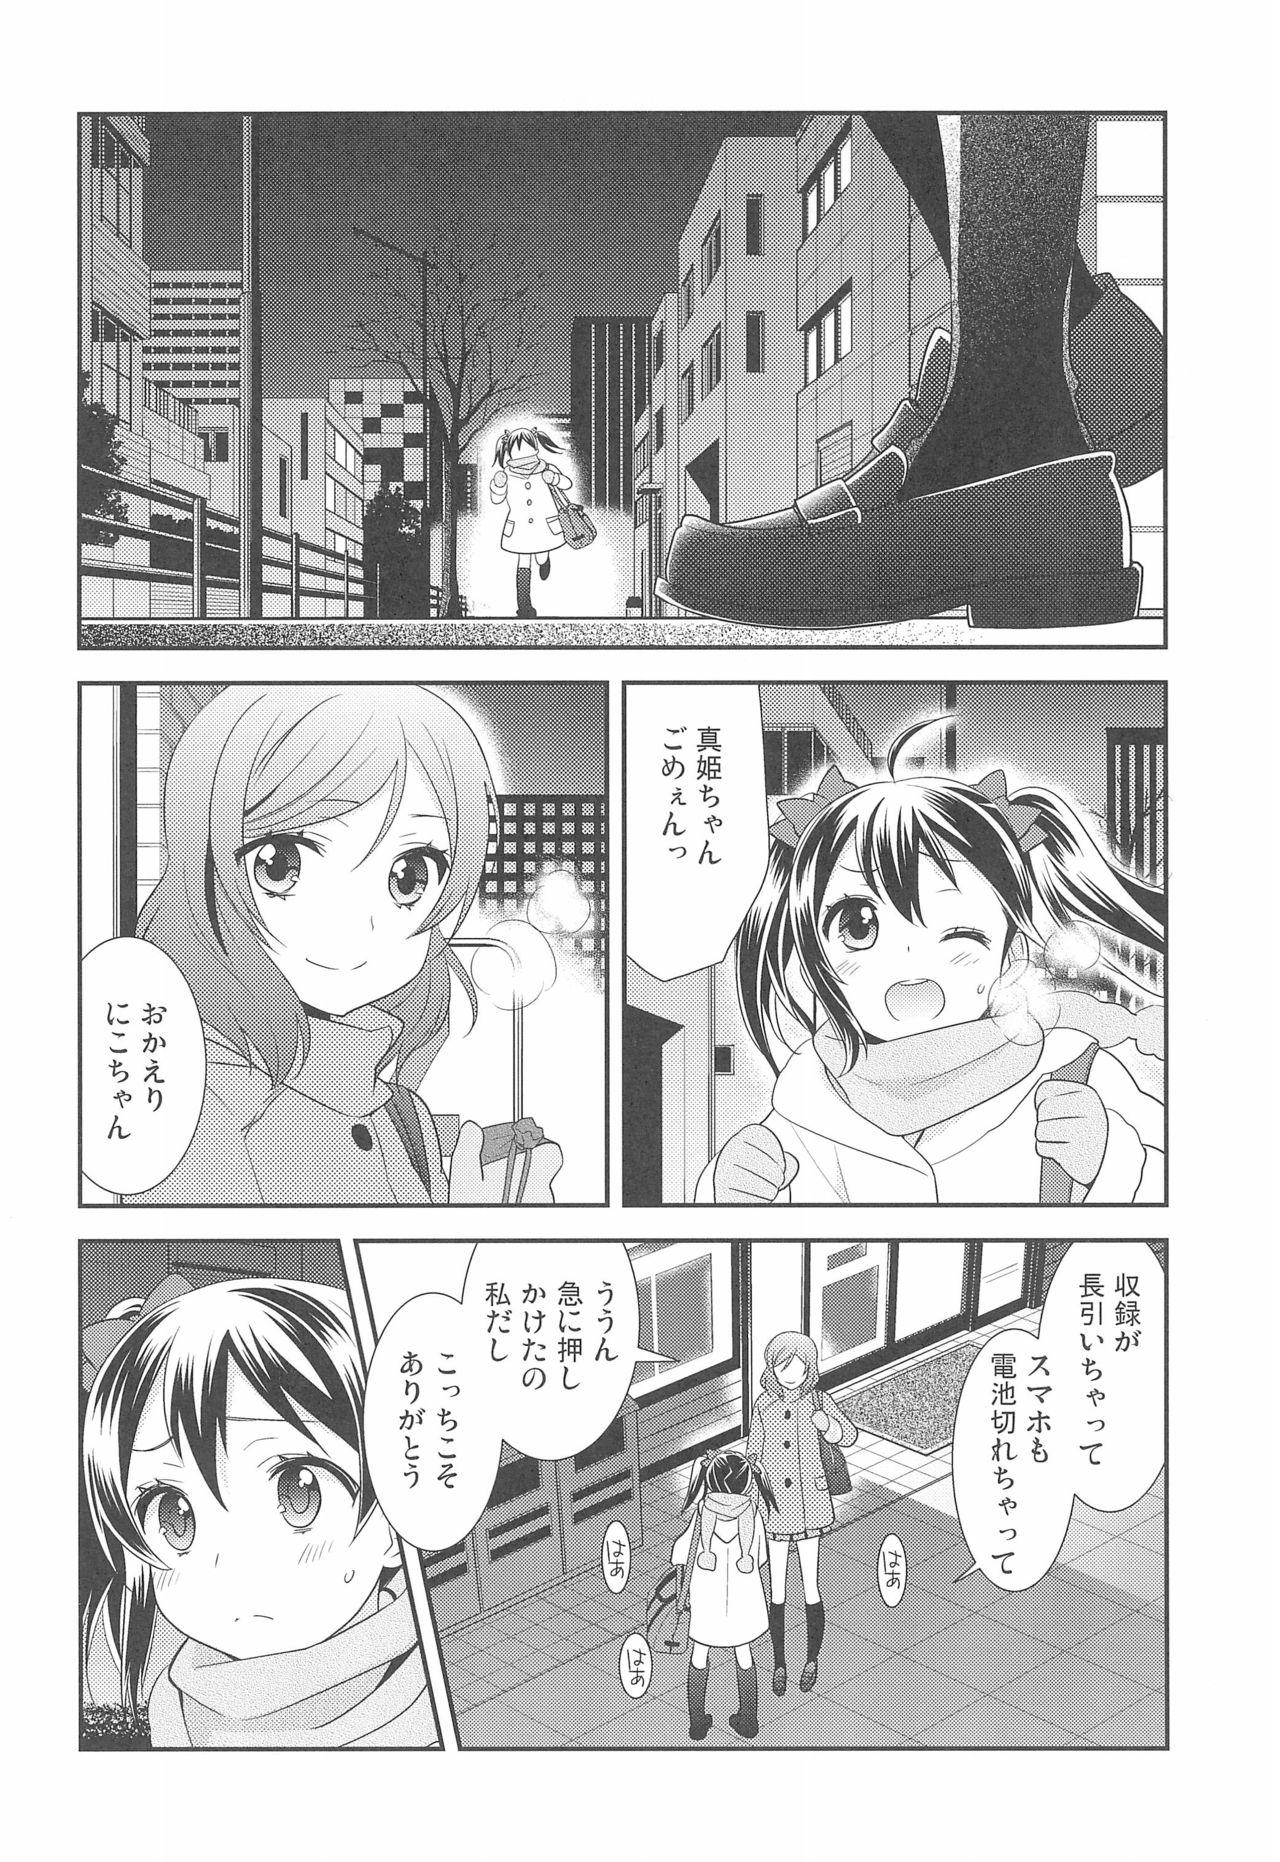 Class Room BABY I LOVE YOU - Love live Swing - Page 4